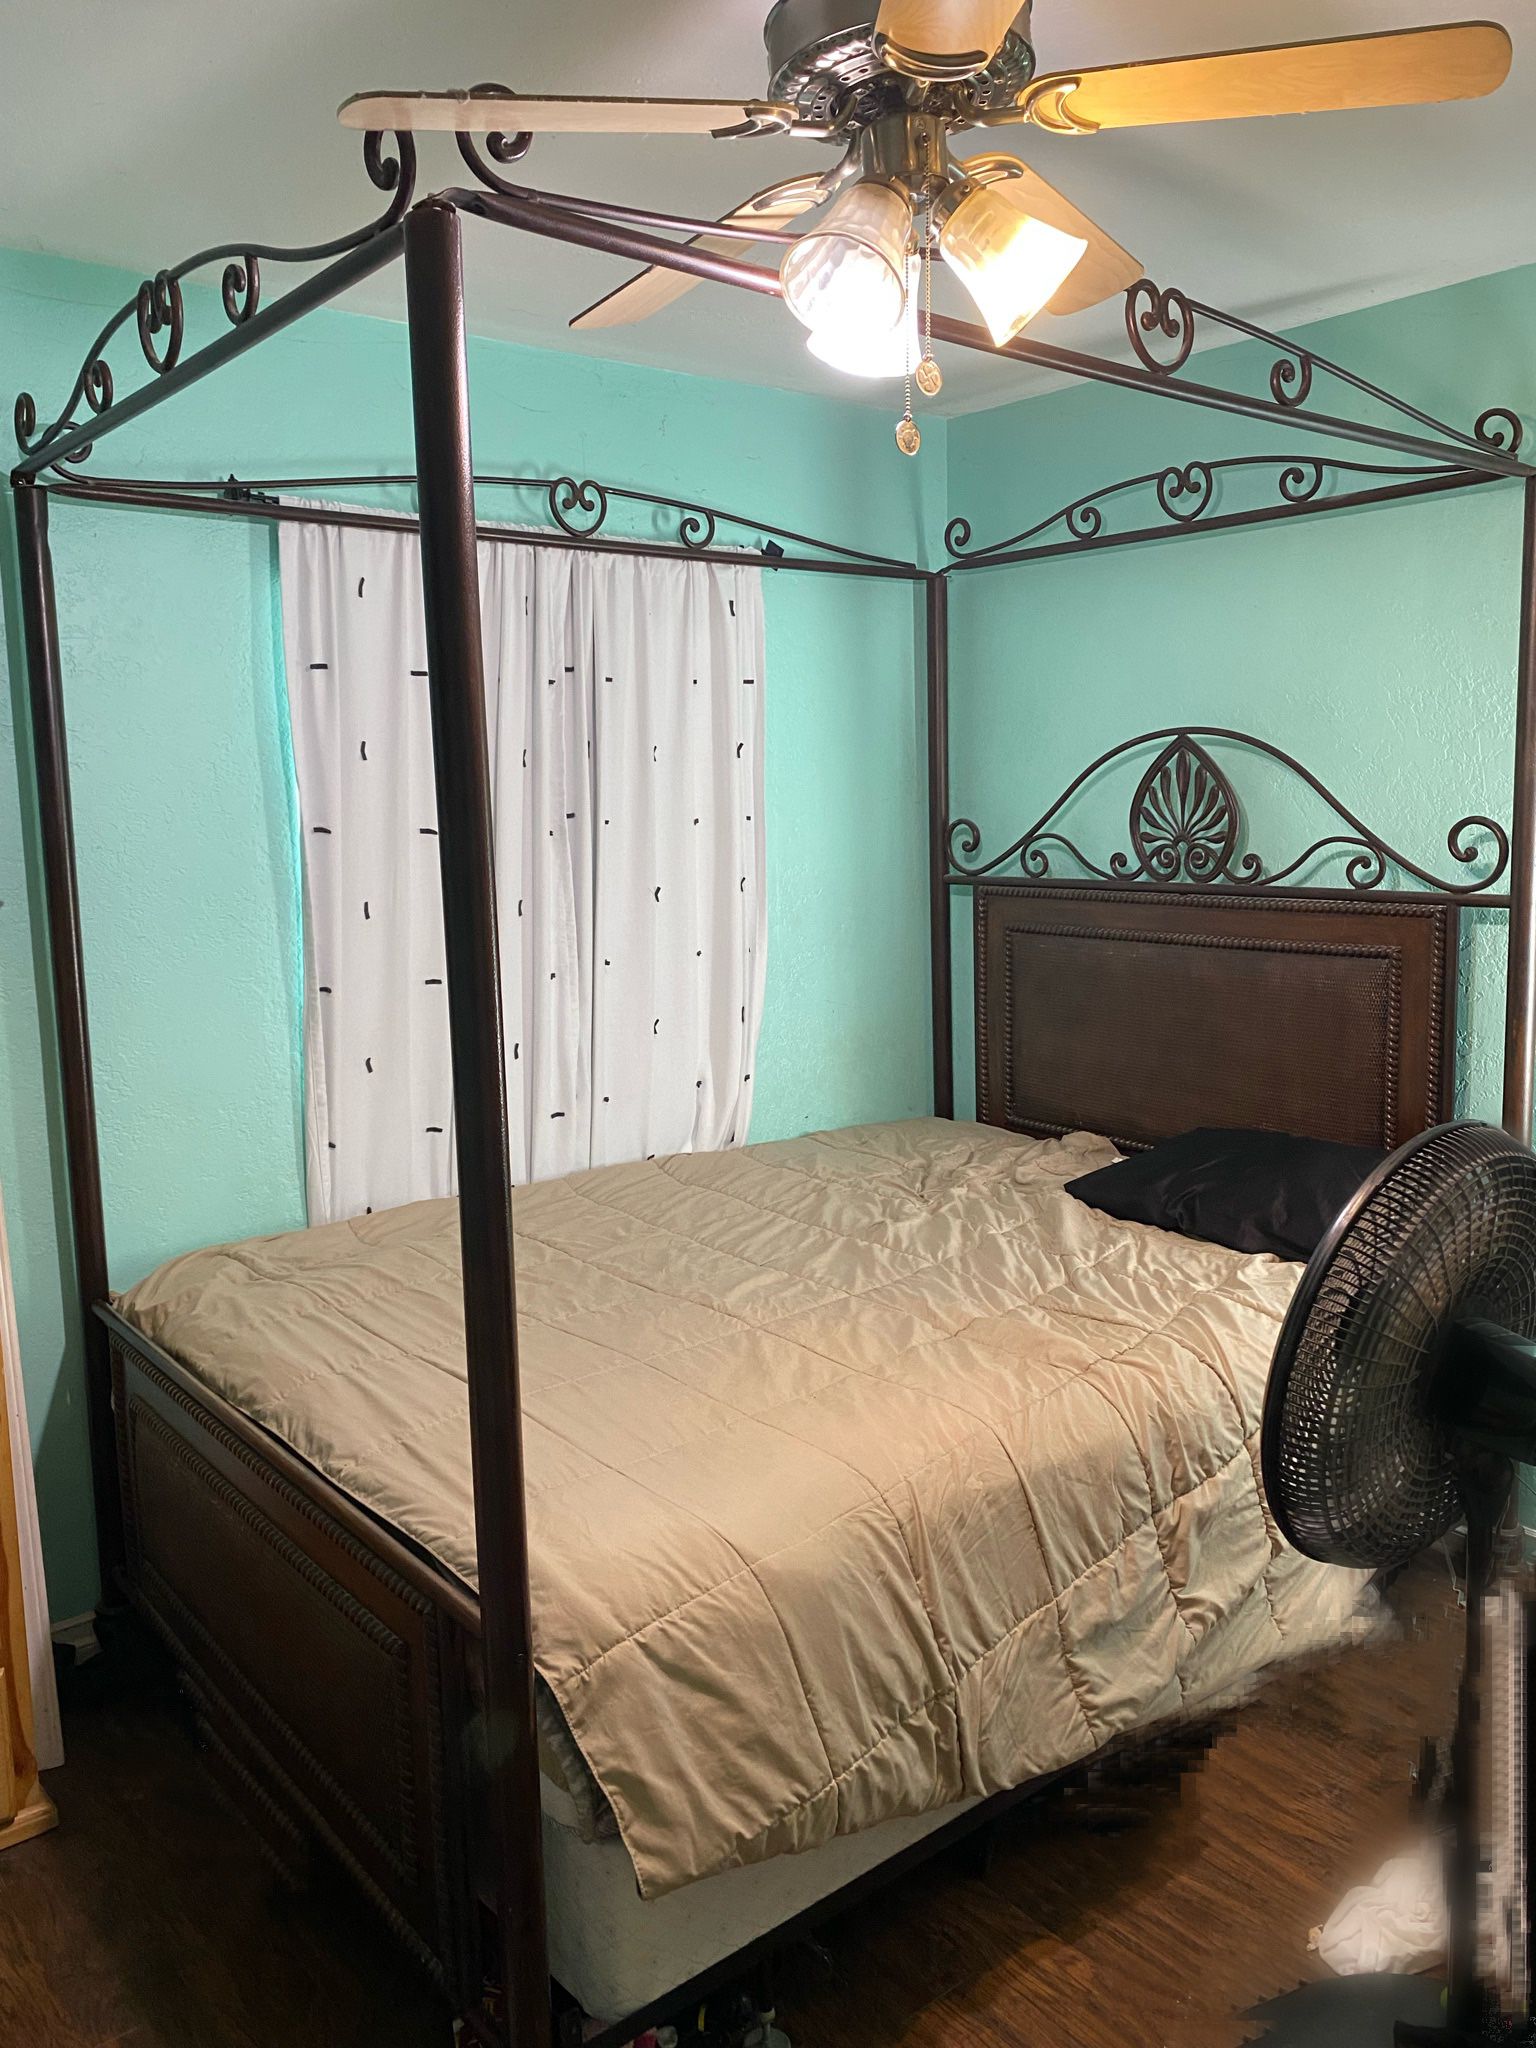 Canopy Queen Bed Frame 